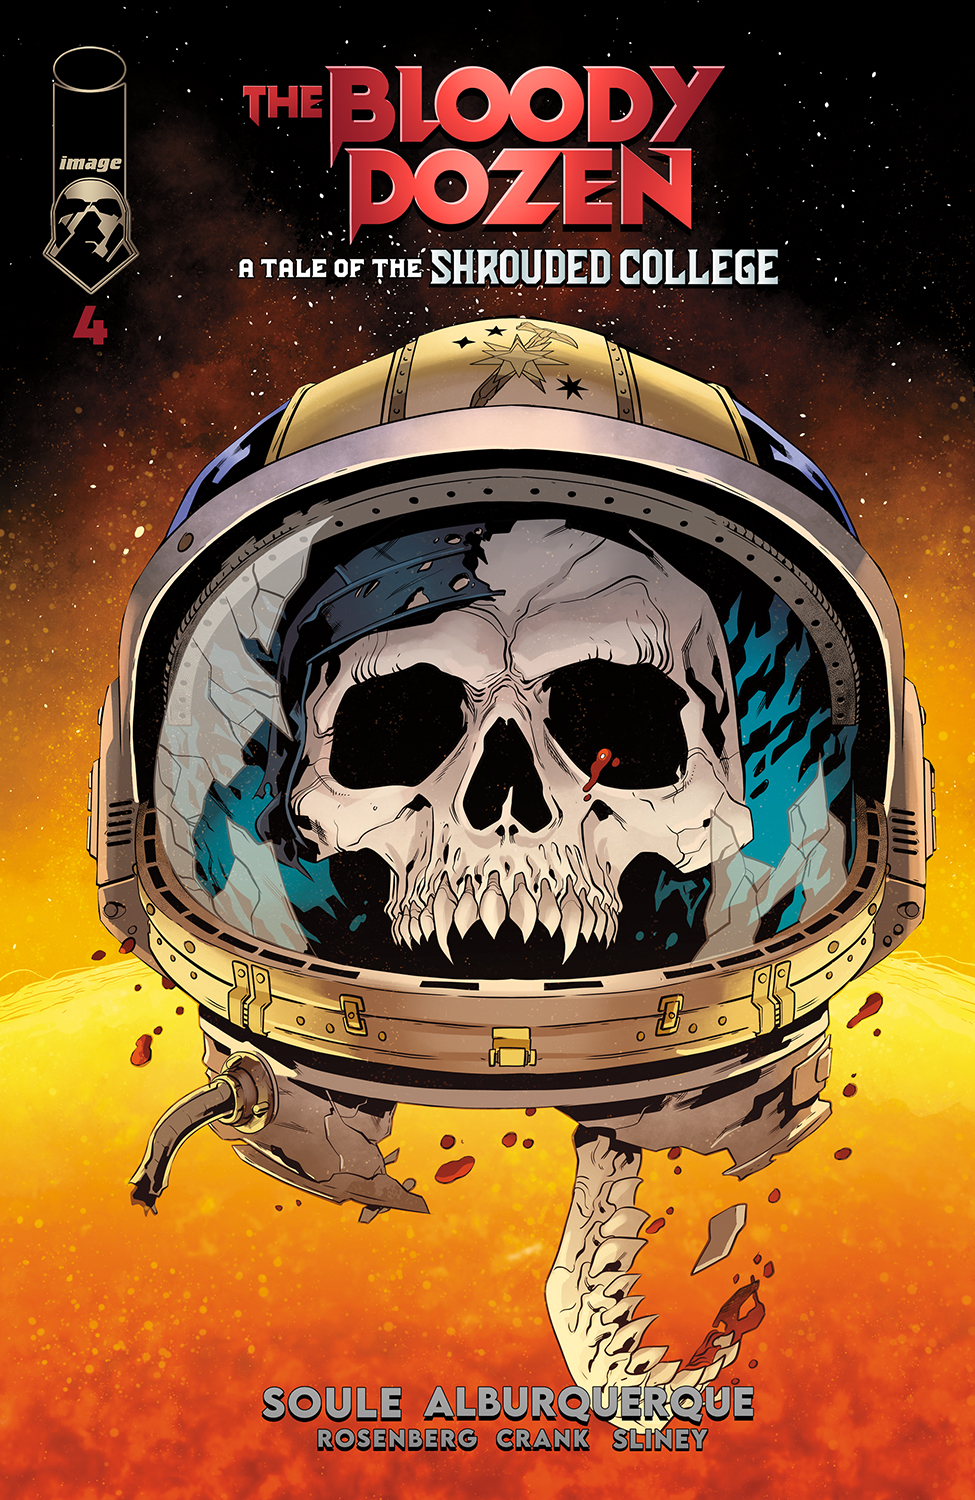 Bloody Dozen a Tale of the Shrouded College #4 Cover A Will Sliney (Of 6)